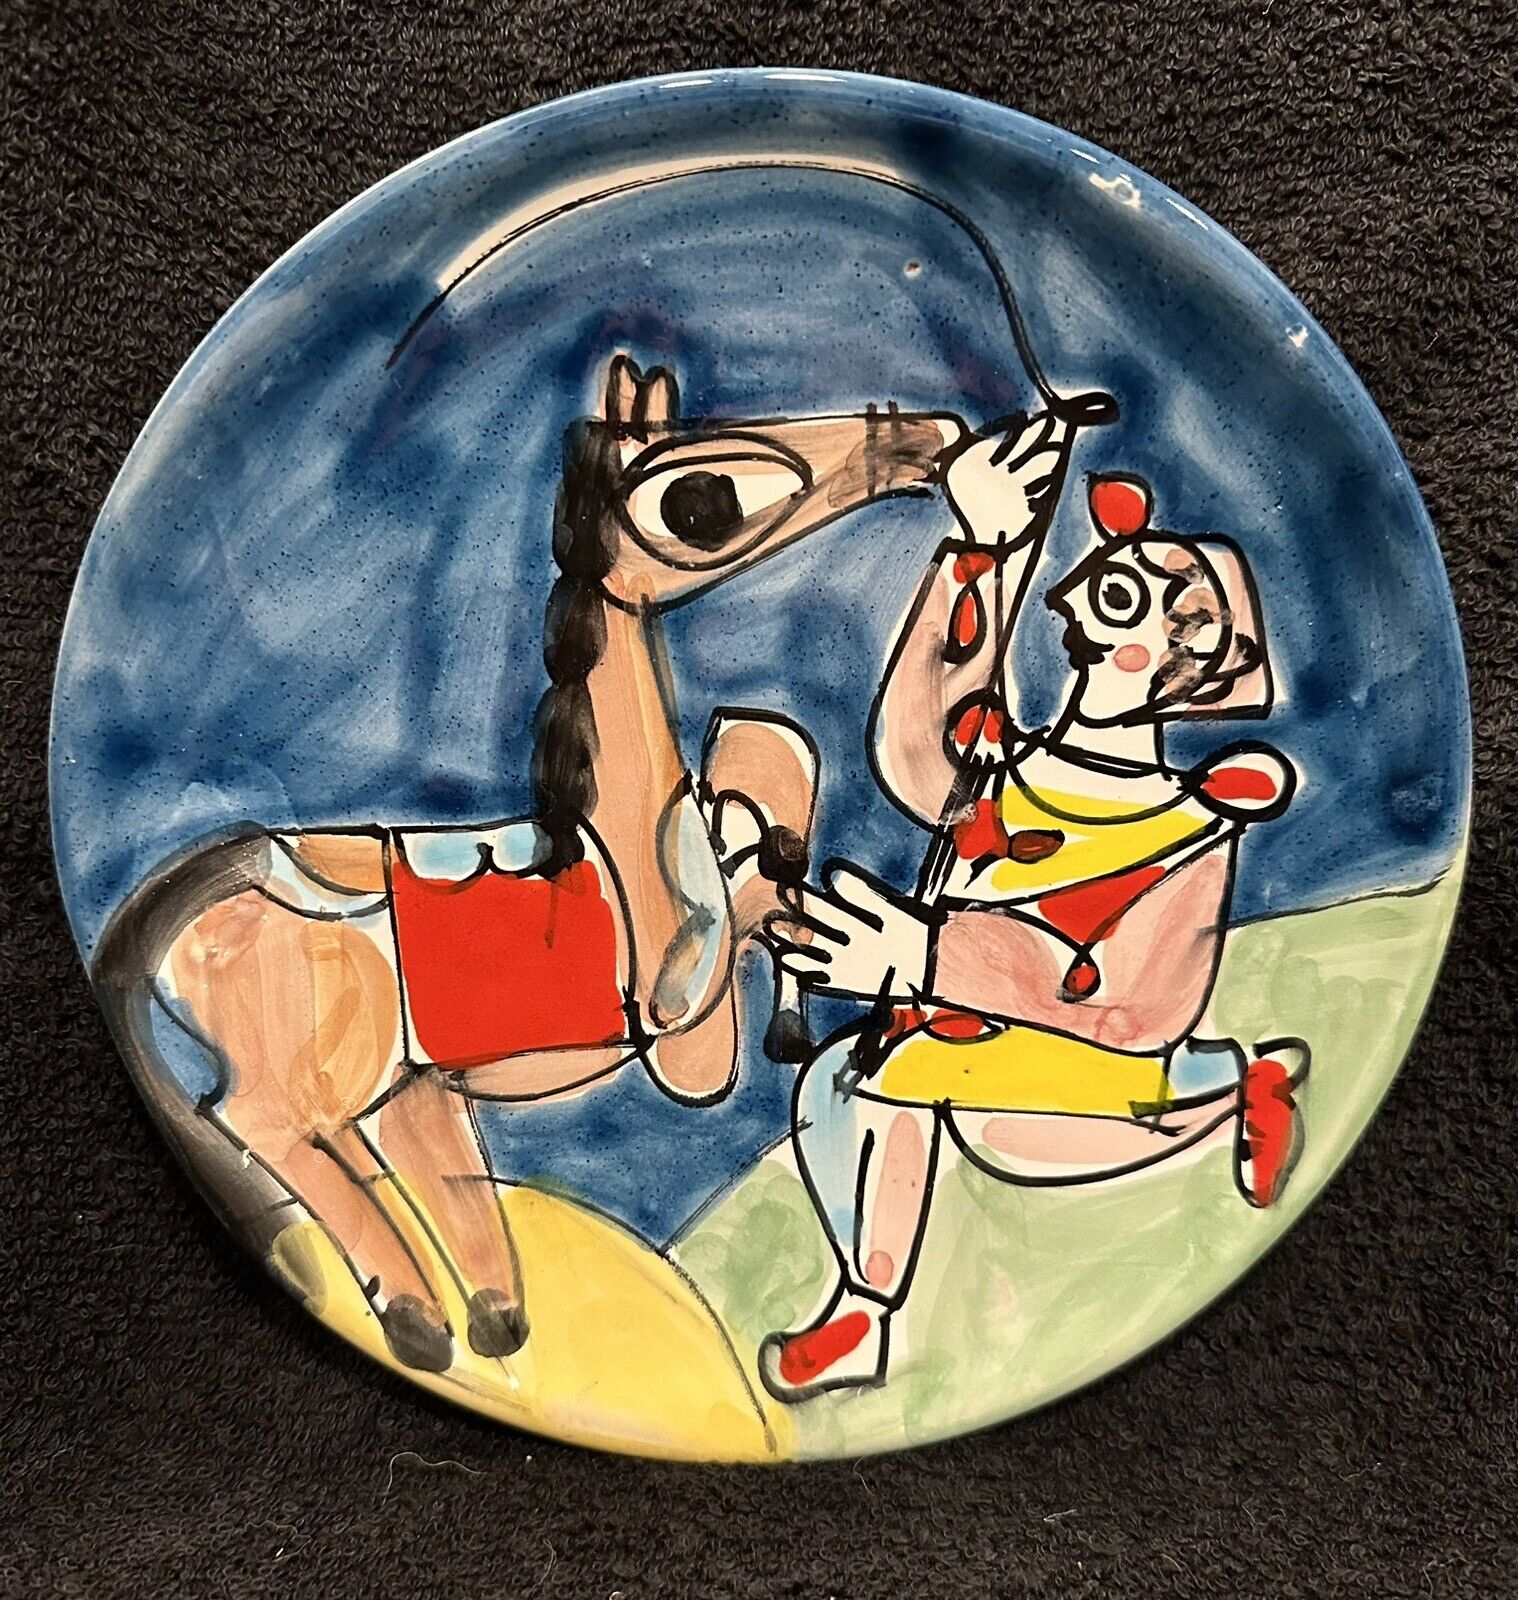 La Musa Carnevale Ceramic 8”Pony Trainer Plate Made In Italy For Saks 5th Avenue